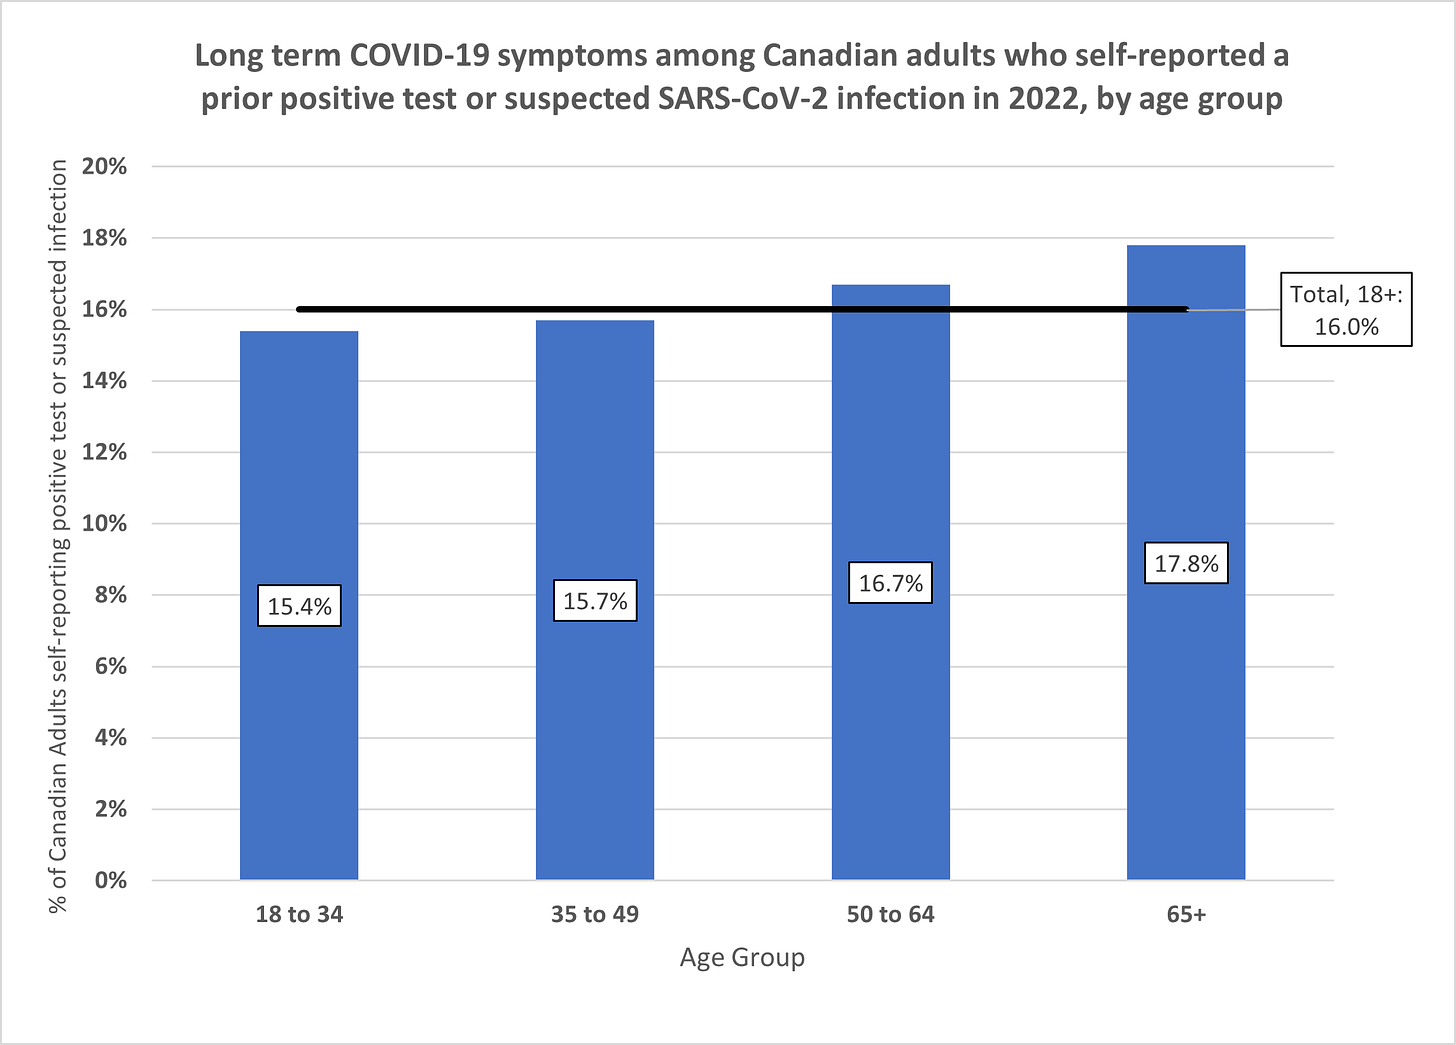 Bar chart showing the percentage of Canadian adults who reported a prior positive COVID-19 test or suspected infection reporting long-term symptoms, by age group. The figures reflect those detailed in the preceding paragraphs.